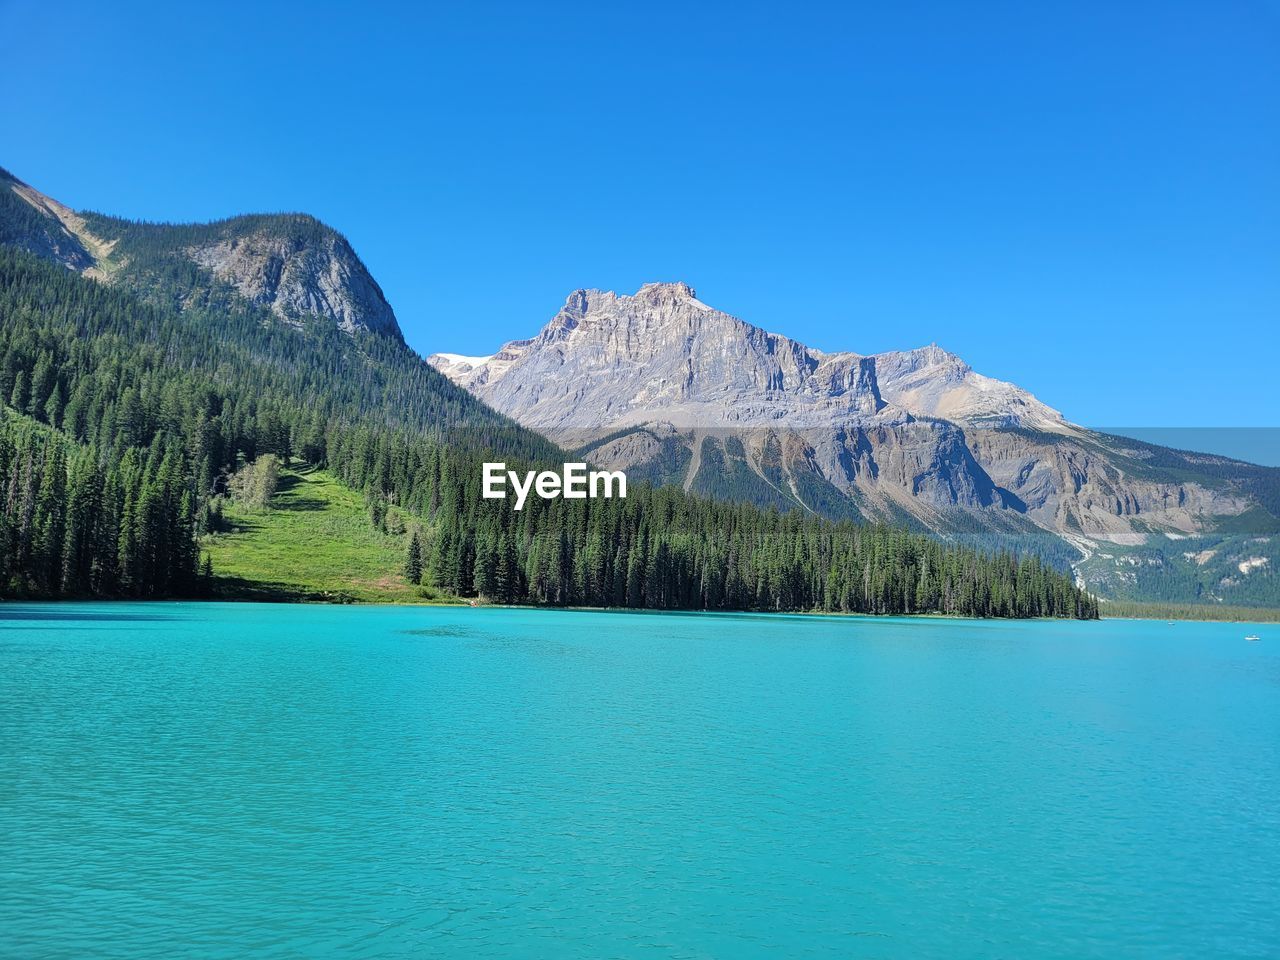 SCENIC VIEW OF MOUNTAIN AGAINST CLEAR BLUE SKY